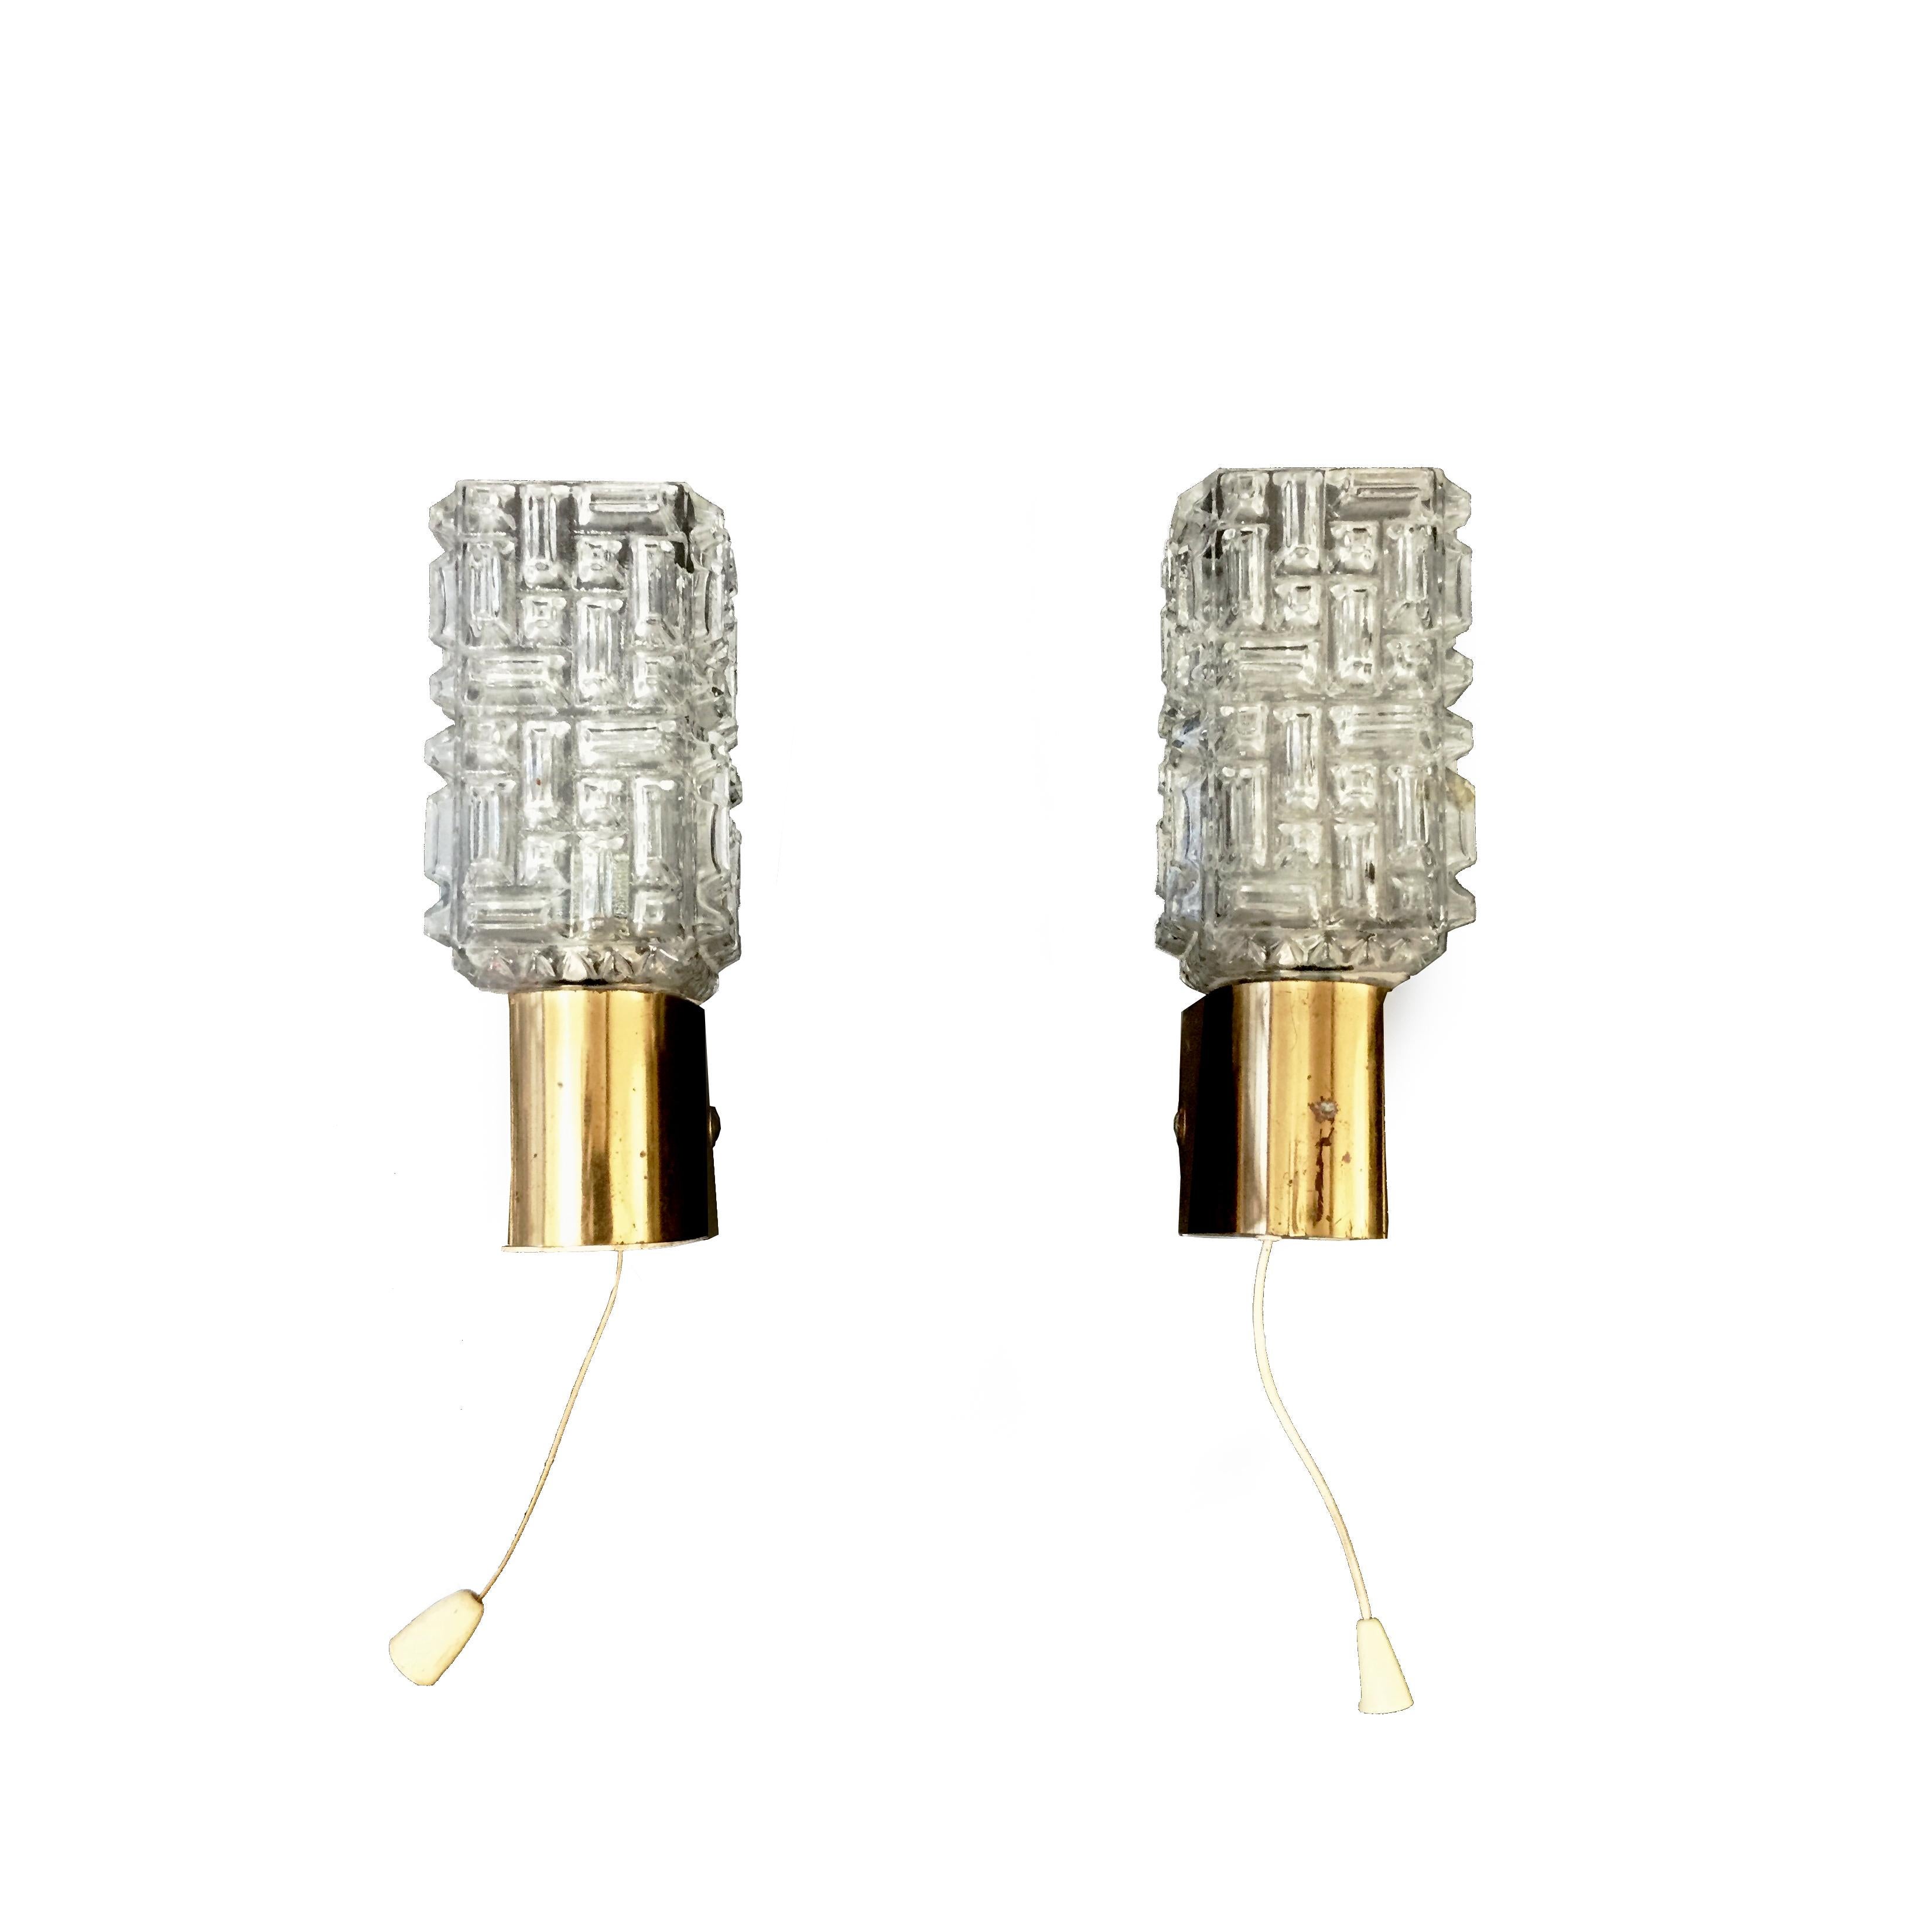 Murano glass sconces with brass housing. Sold as a pair.

 